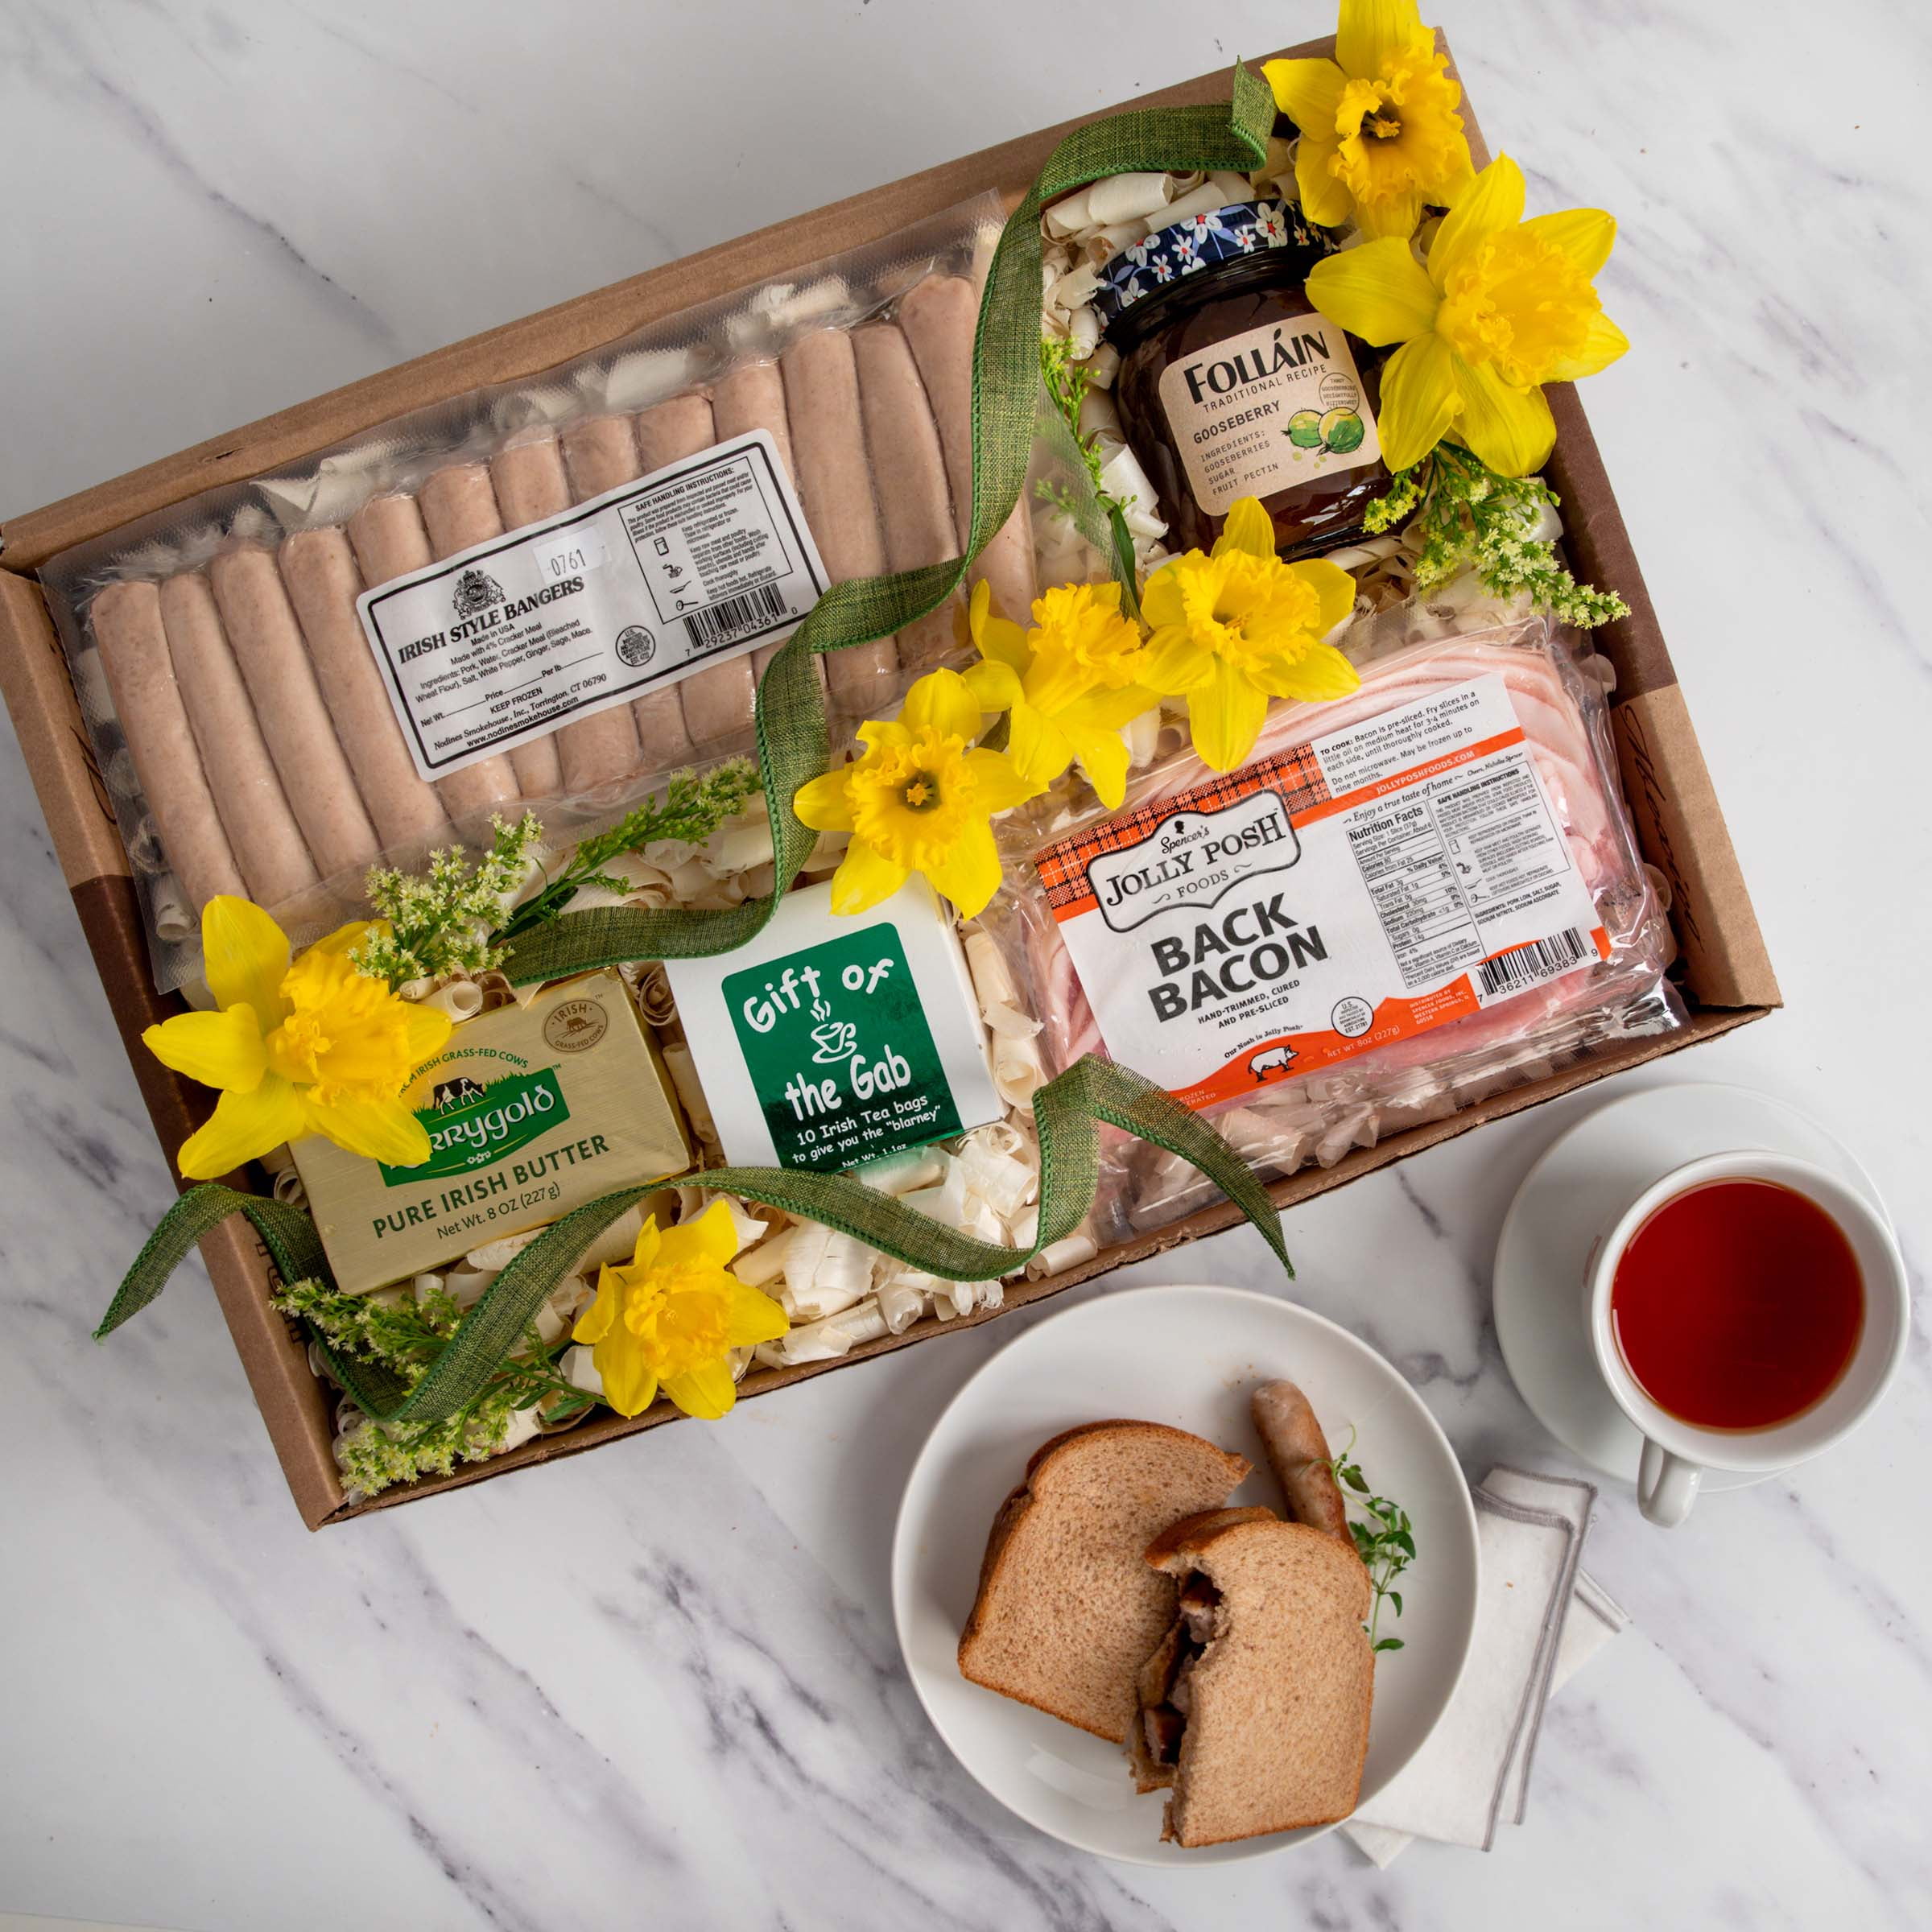 igourmet Full Irish Breakfast Gift Basket - Perfect For St. Patrick's Day-  Irelands Best Breakfast Foods, From Irish Back Bacon, Black Pudding And  Bangers To Butter, Delicious Irish Jam And Tea 